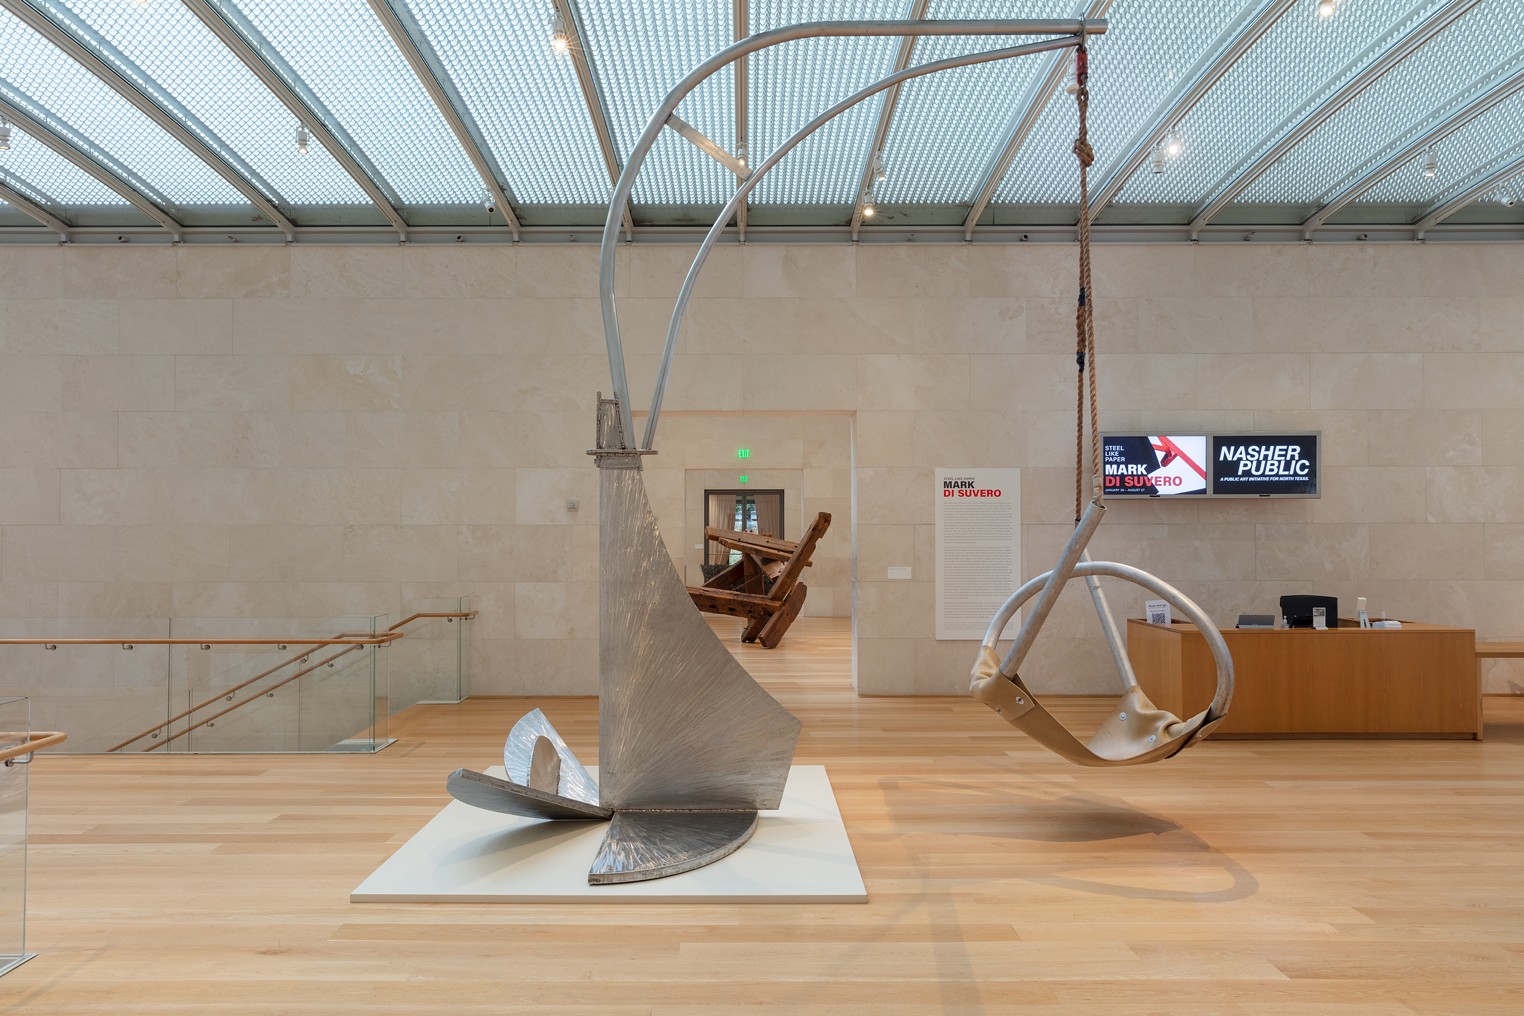 Artist Mark di Suvero’s Towering Vision Is on View at the Nasher Sculpture Center